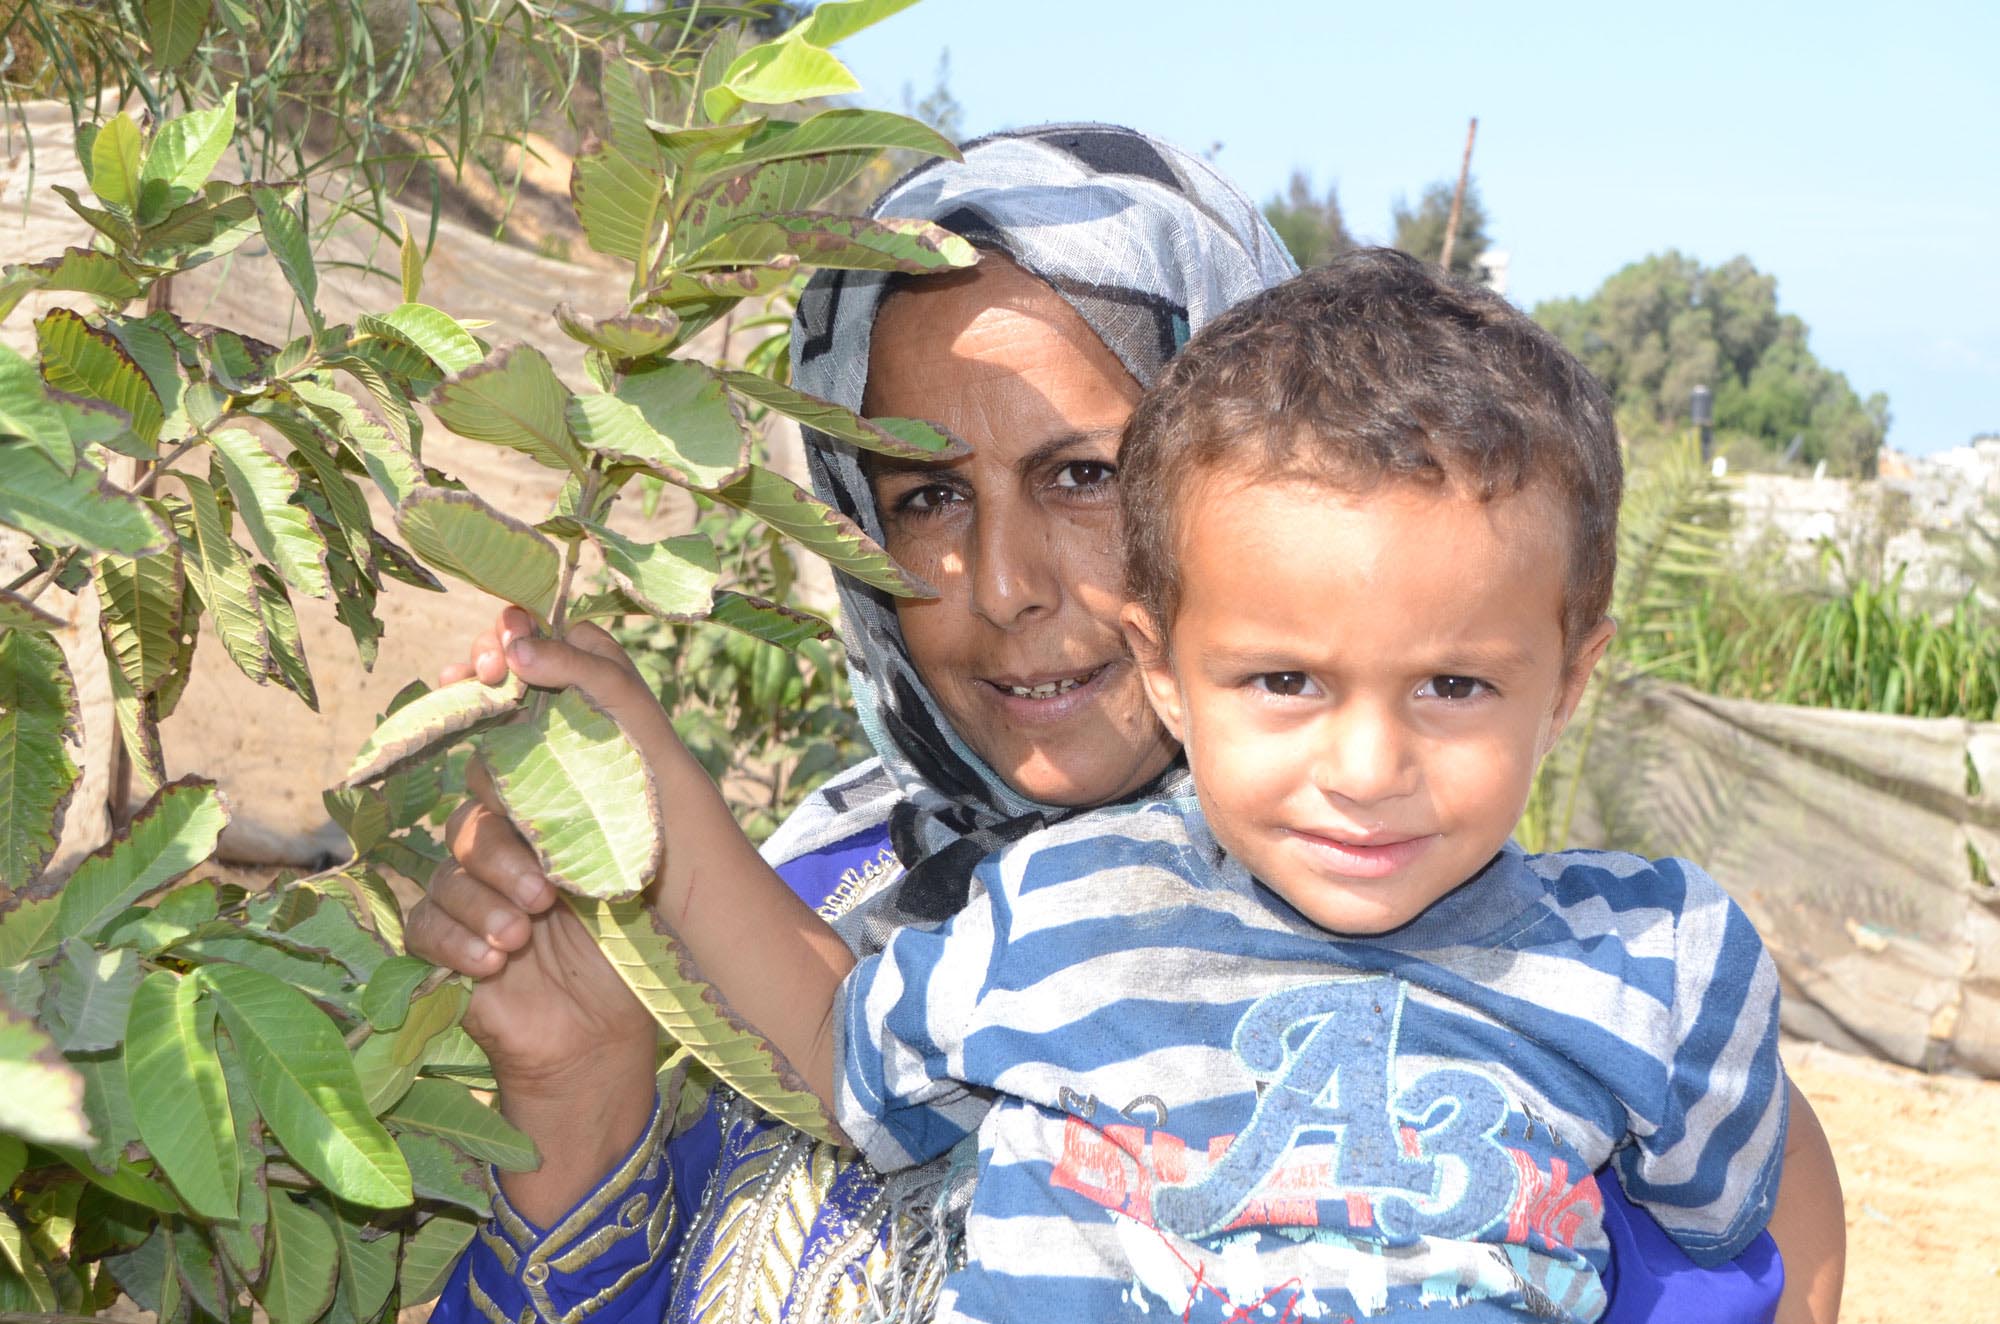 Amena El Masri and her grandchild in the shade of her Guava tree next to the new home garden Anera installed in her yard.